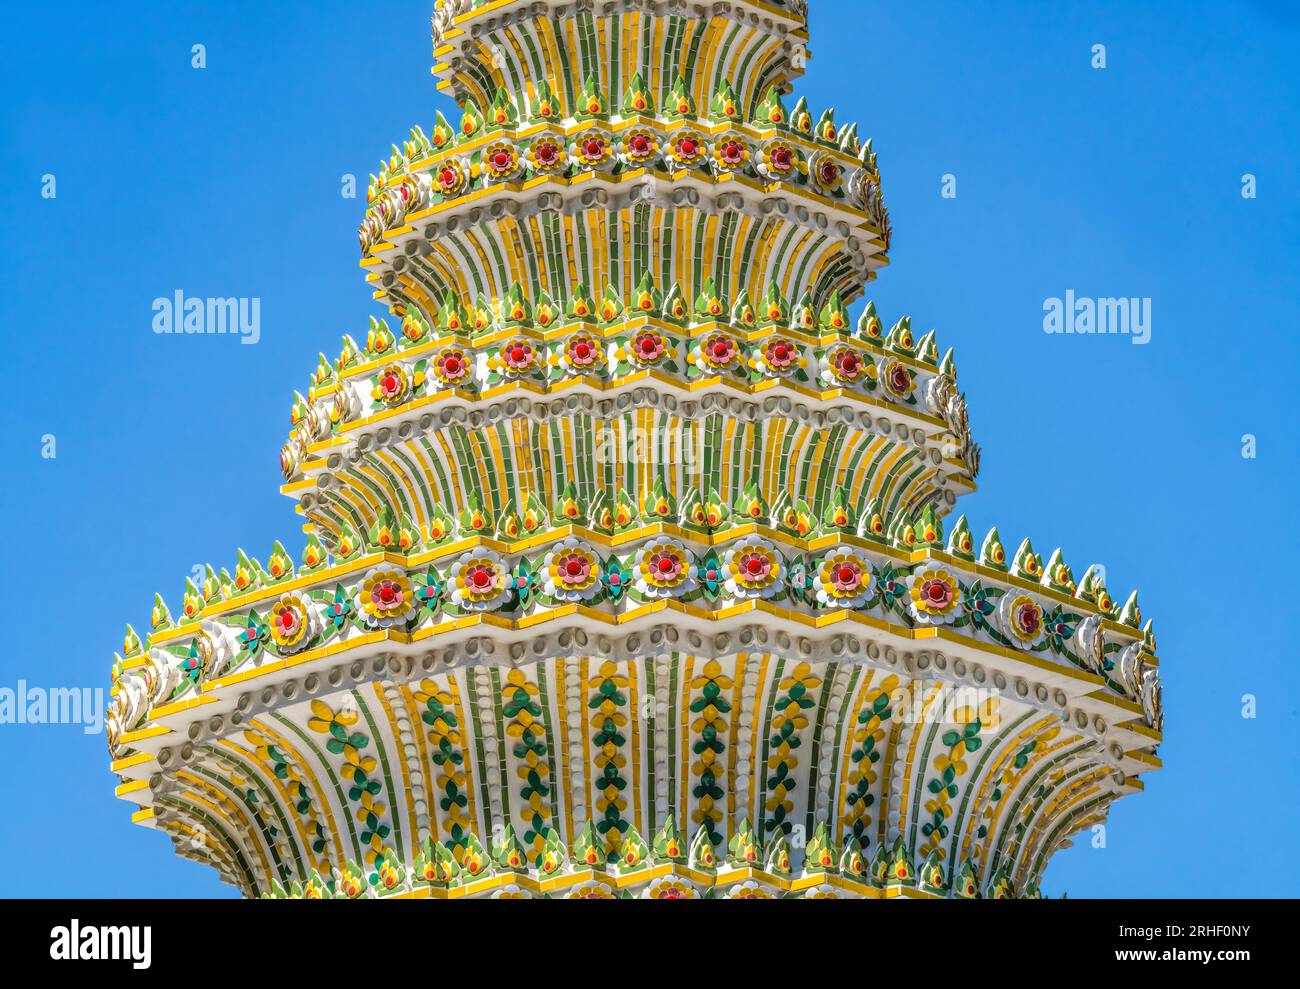 Coloful Ceramic Chedi Spire Pagoda Wat Pho Po Temple Complex Bangkok Thailand. Built in 1600s. One of oldest temples in Thailand. Stock Photo